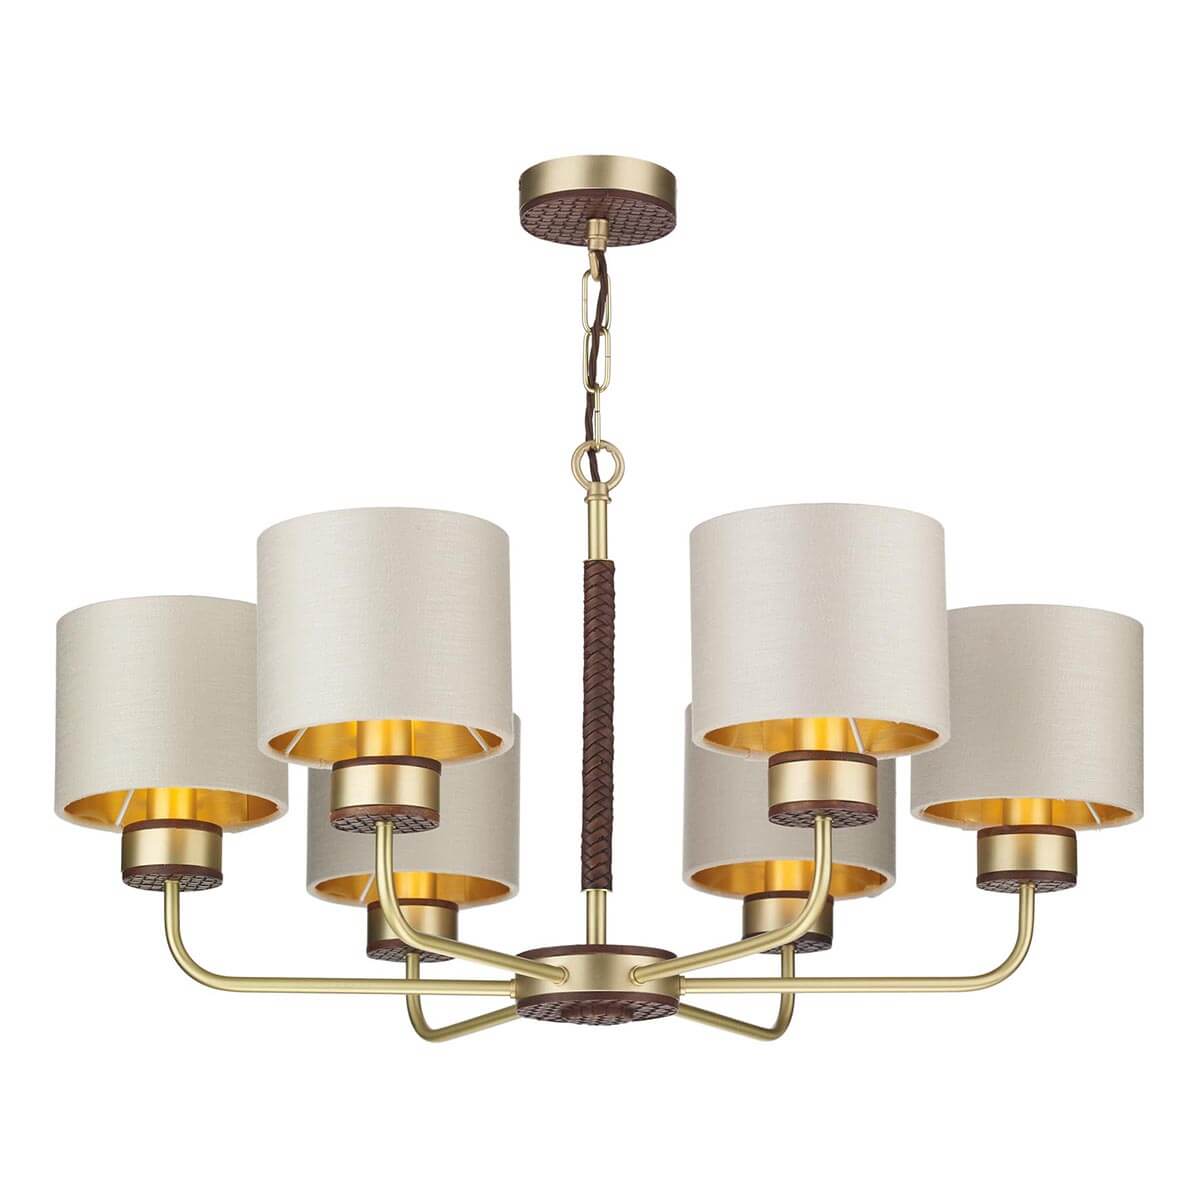 David Hunt Hunter 6 Light Multi-Arm Pendant Butter Brass With Leather Effect Complete With Limestone Linen Shades And Gold Lining